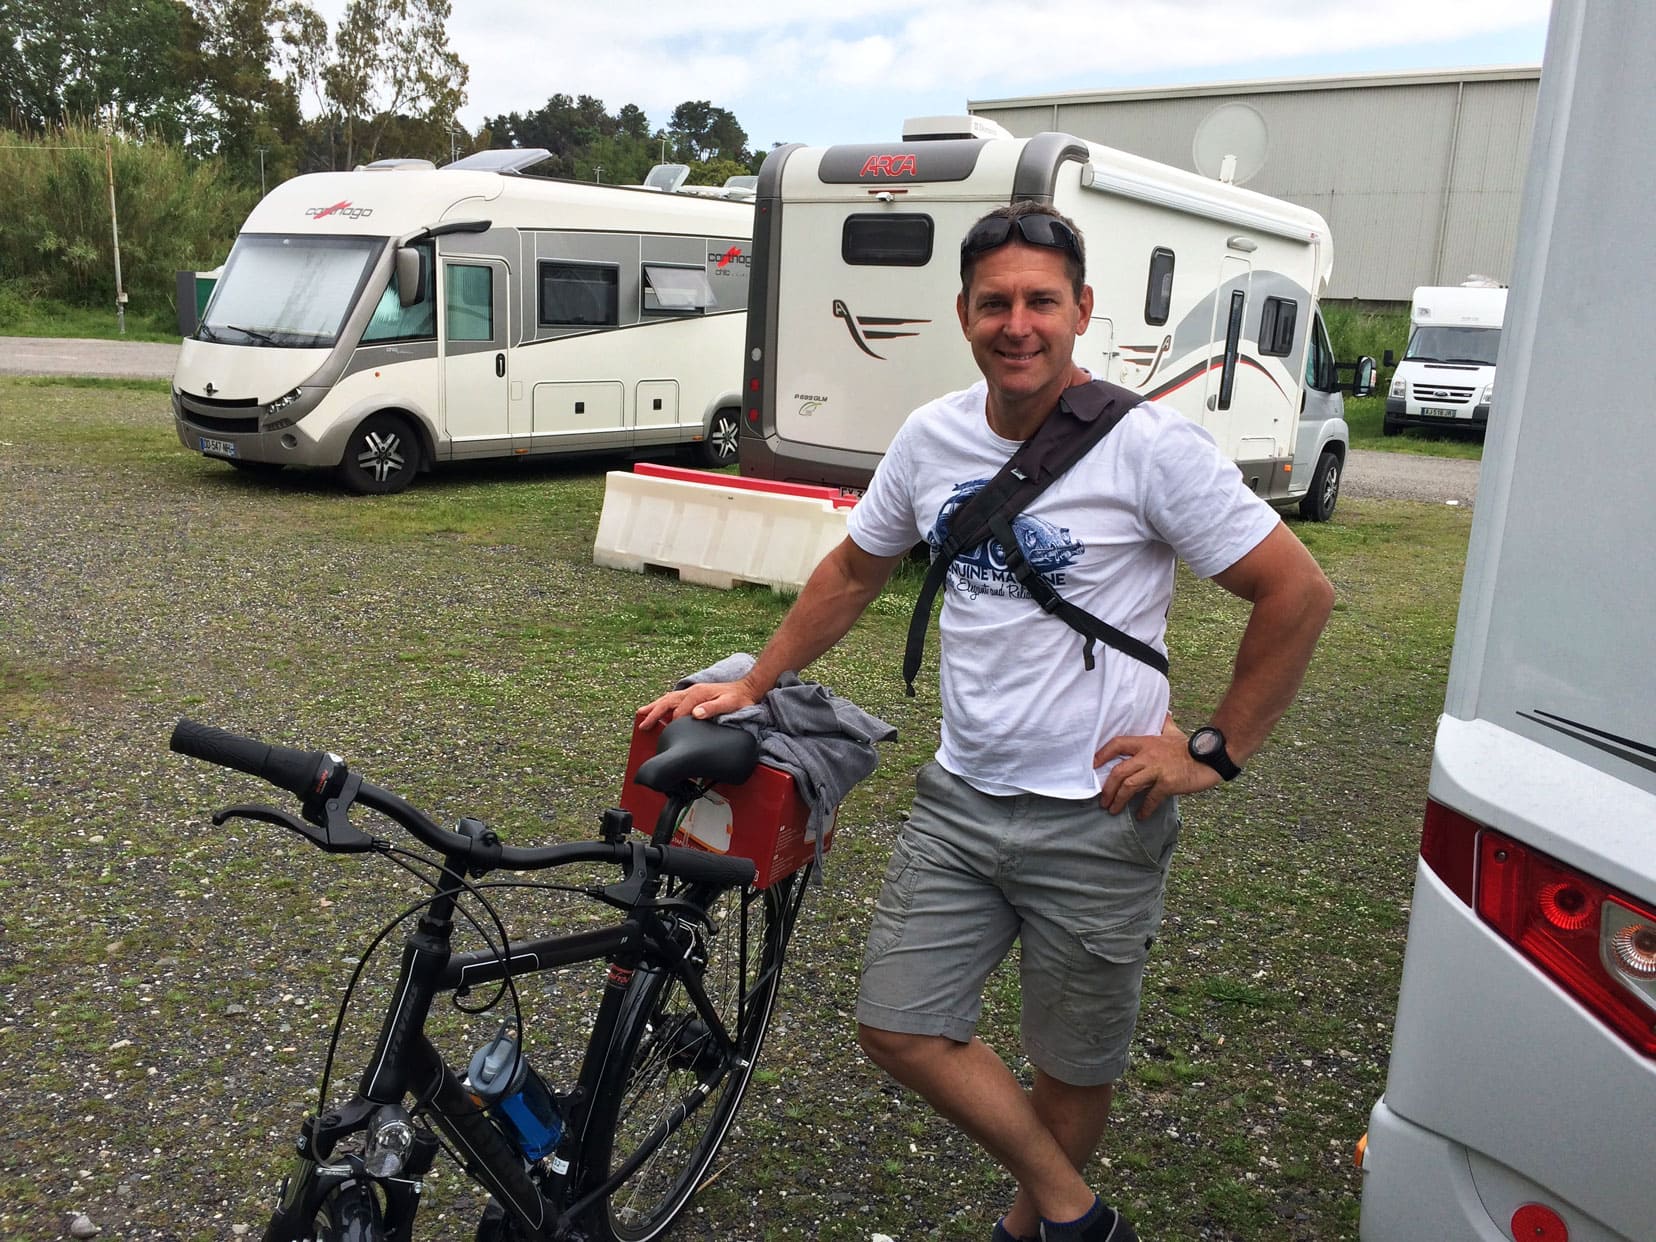 Lars with his bike by the camper